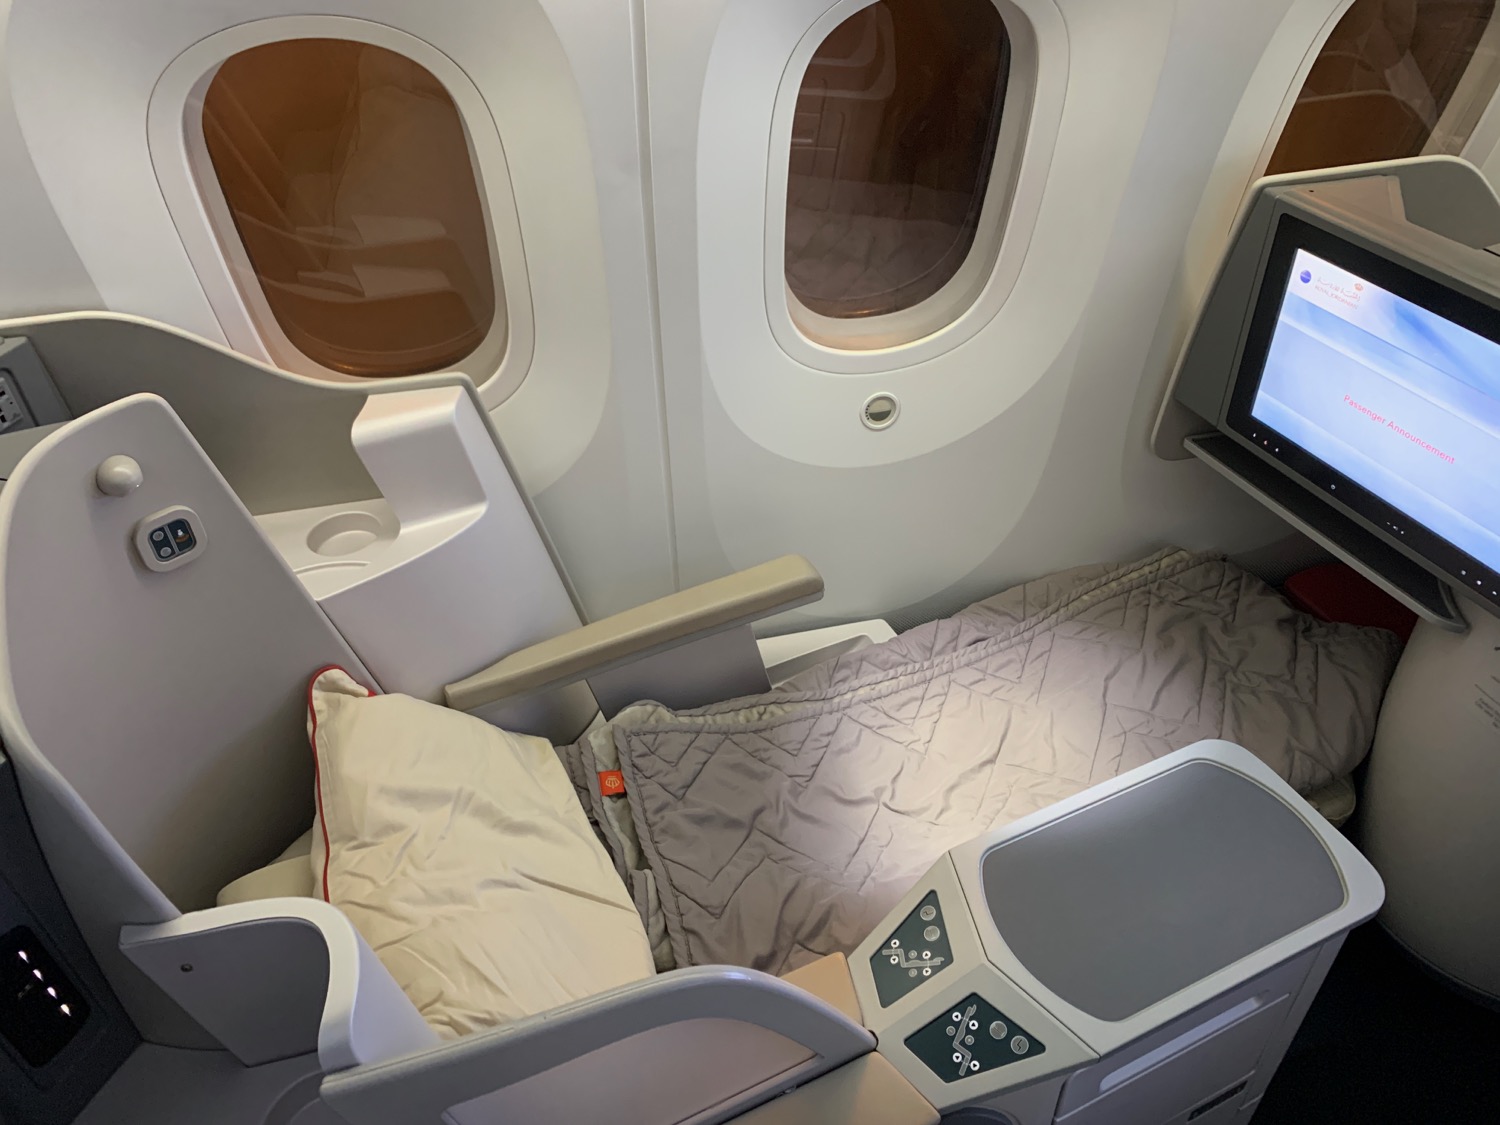 a bed and a monitor in a plane